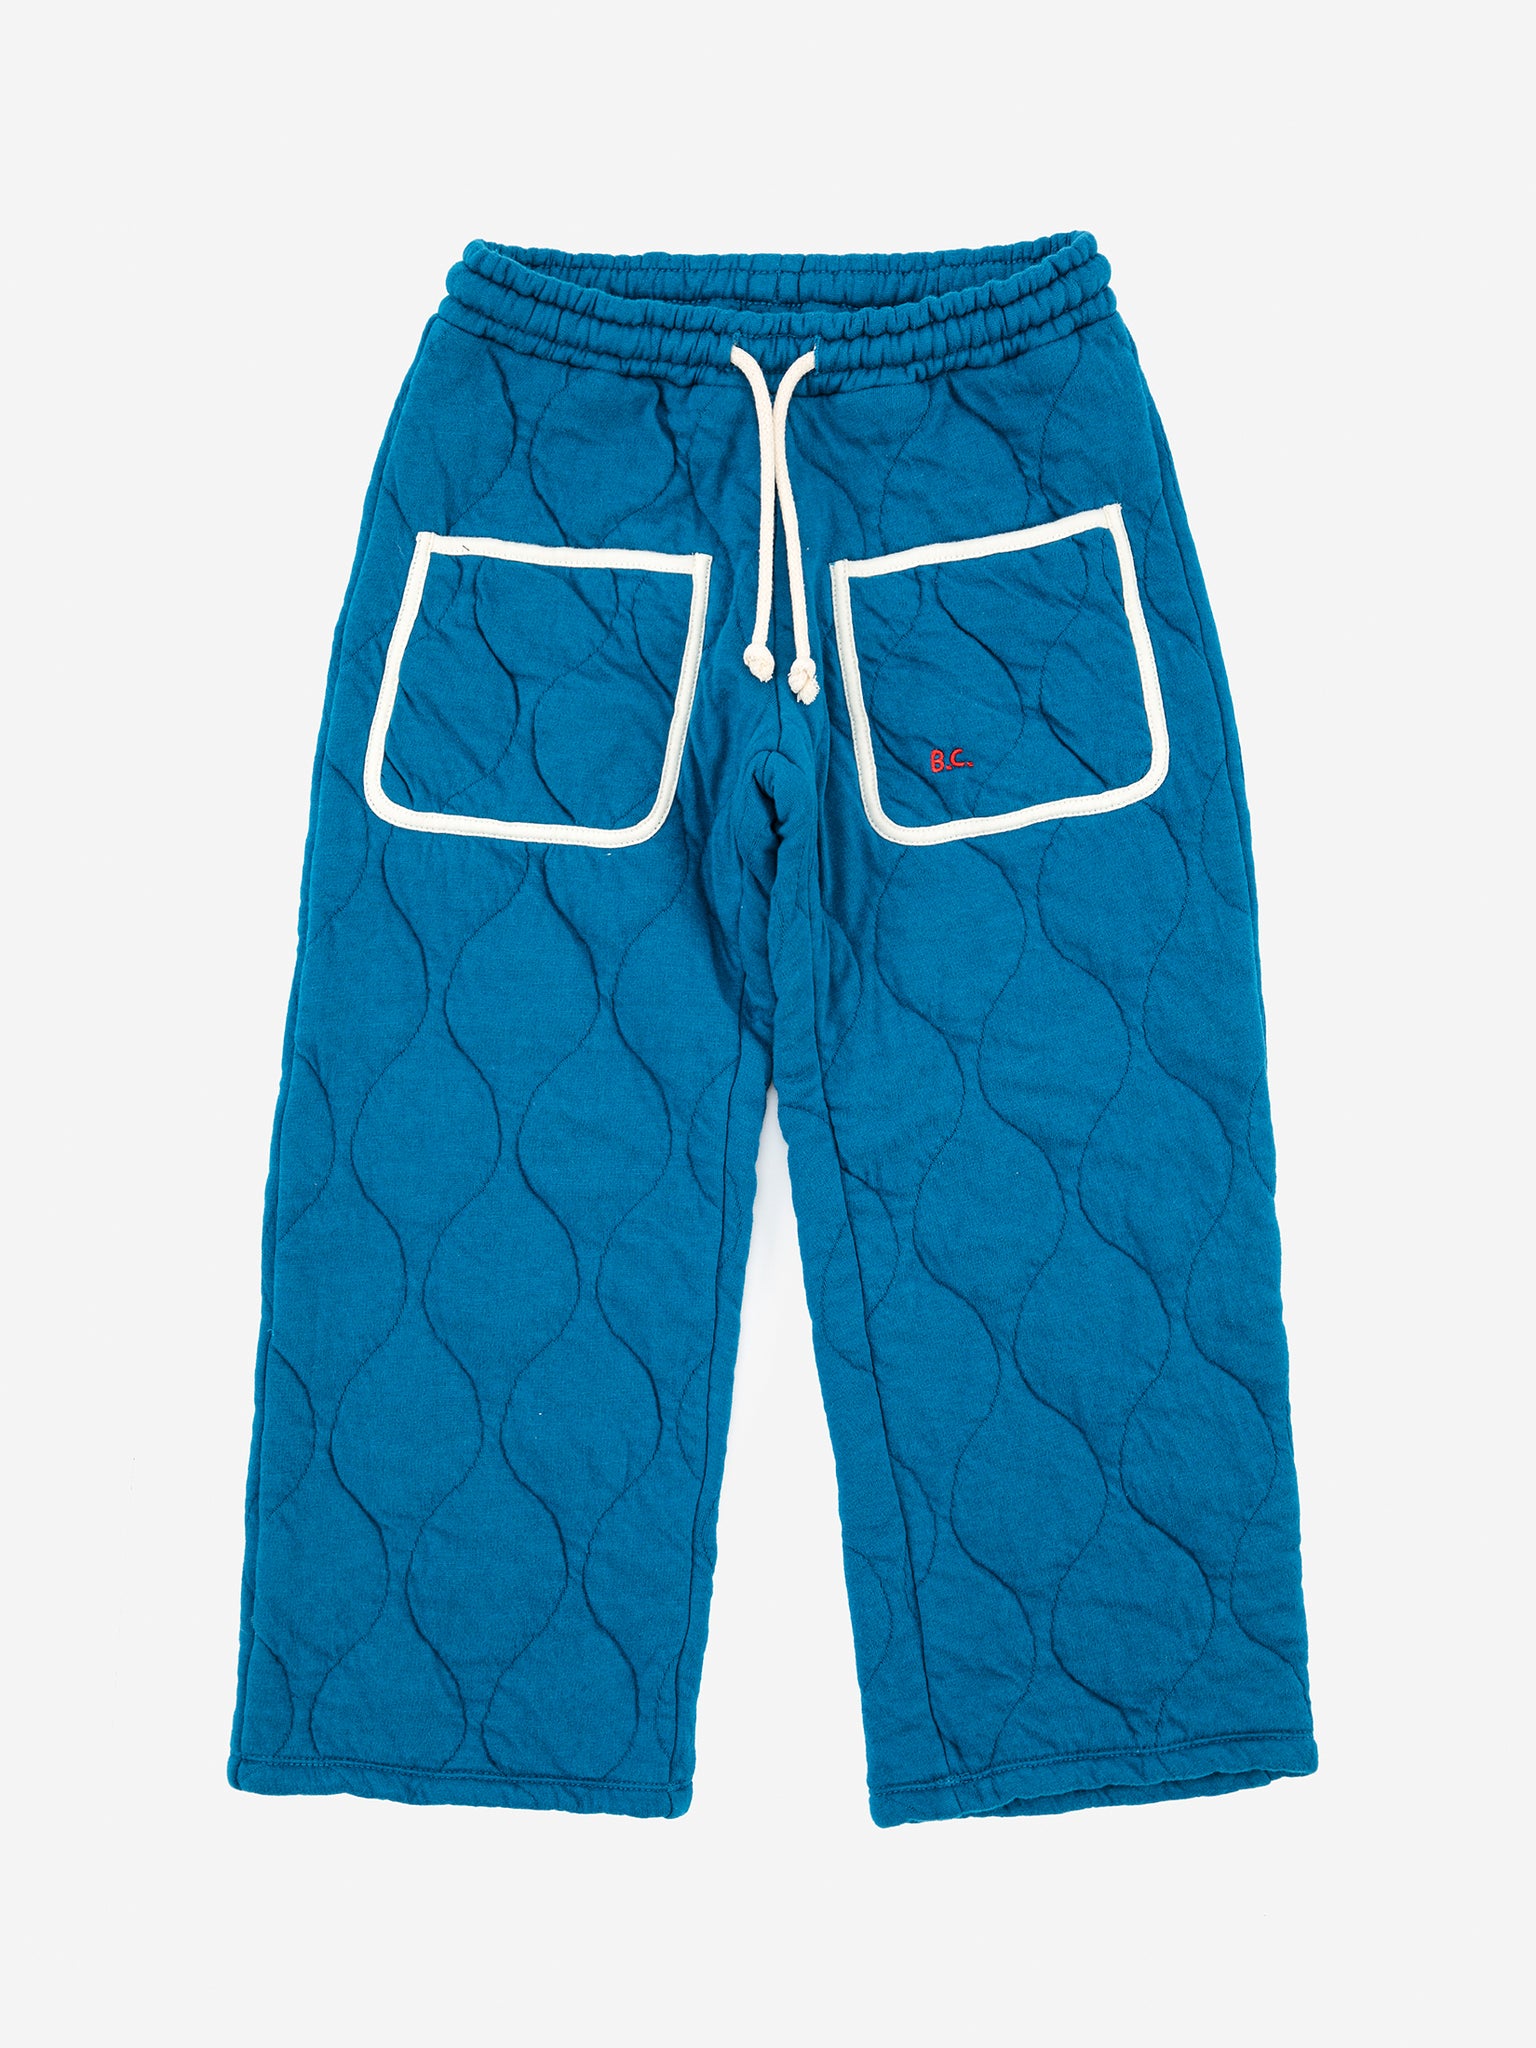 BC quilted jogging pants